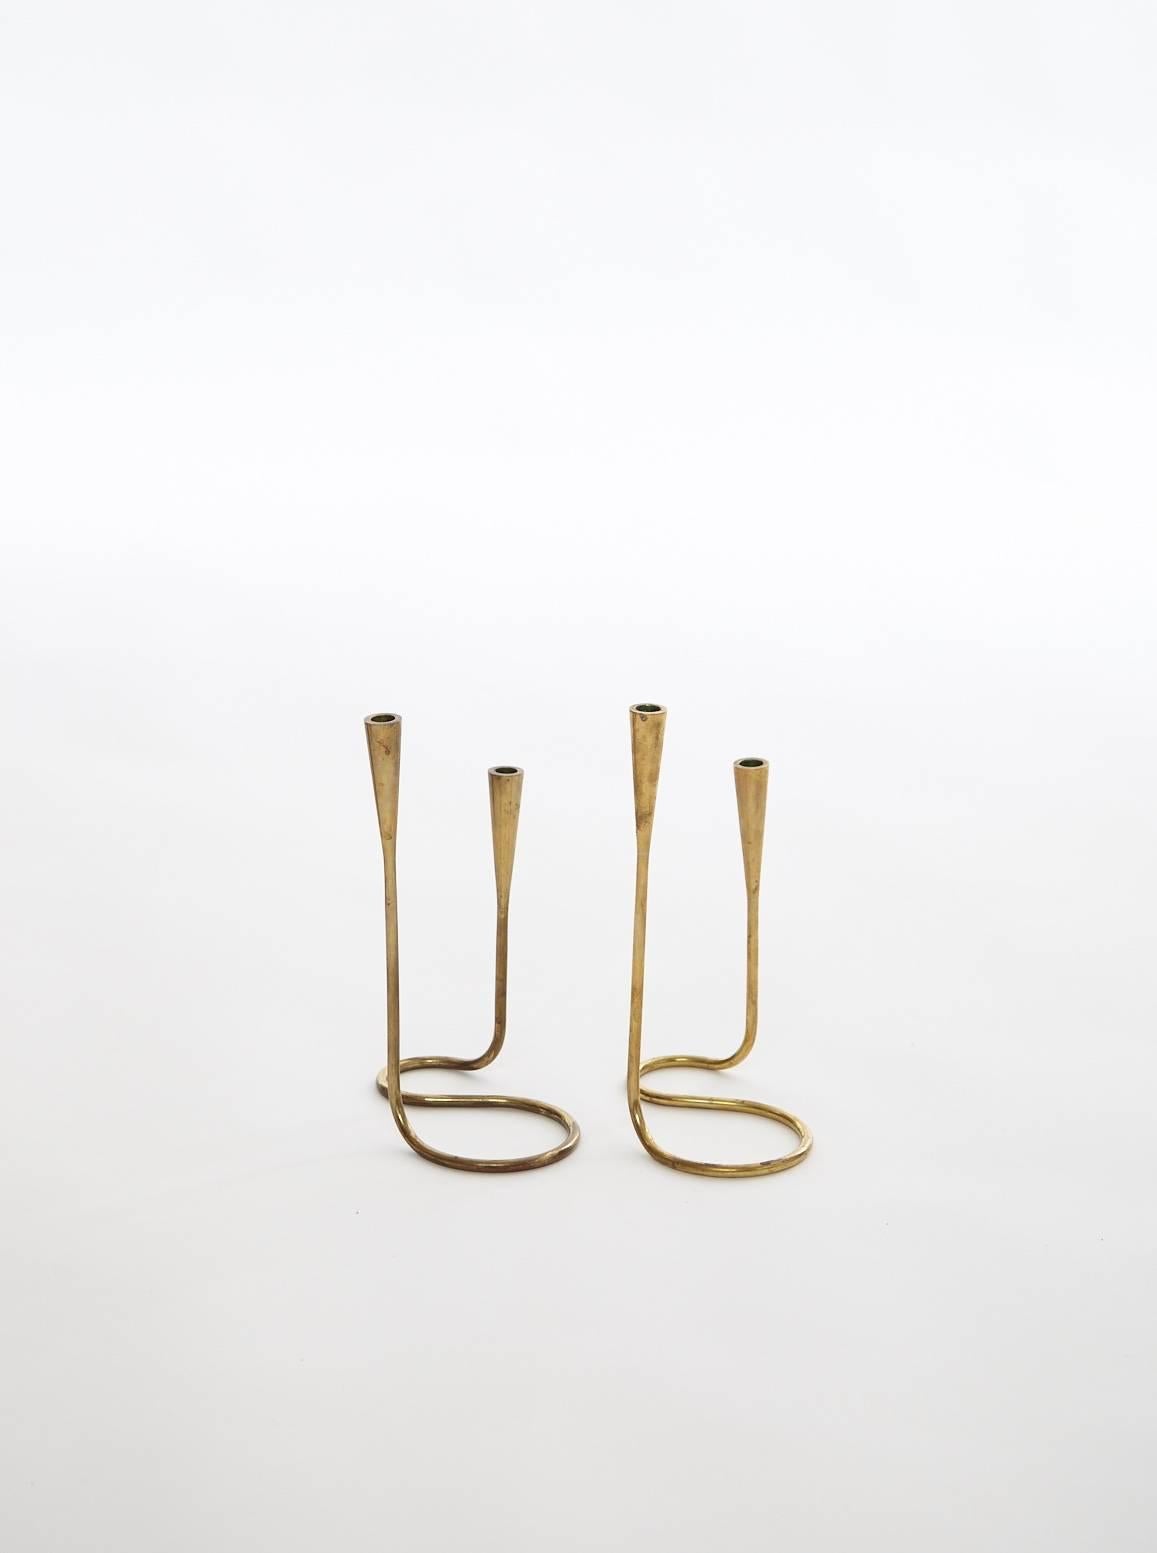 A rare pair of brass double ended Serpentine candlesticks by Illums Bolighus, Denmark, circa 1950s.